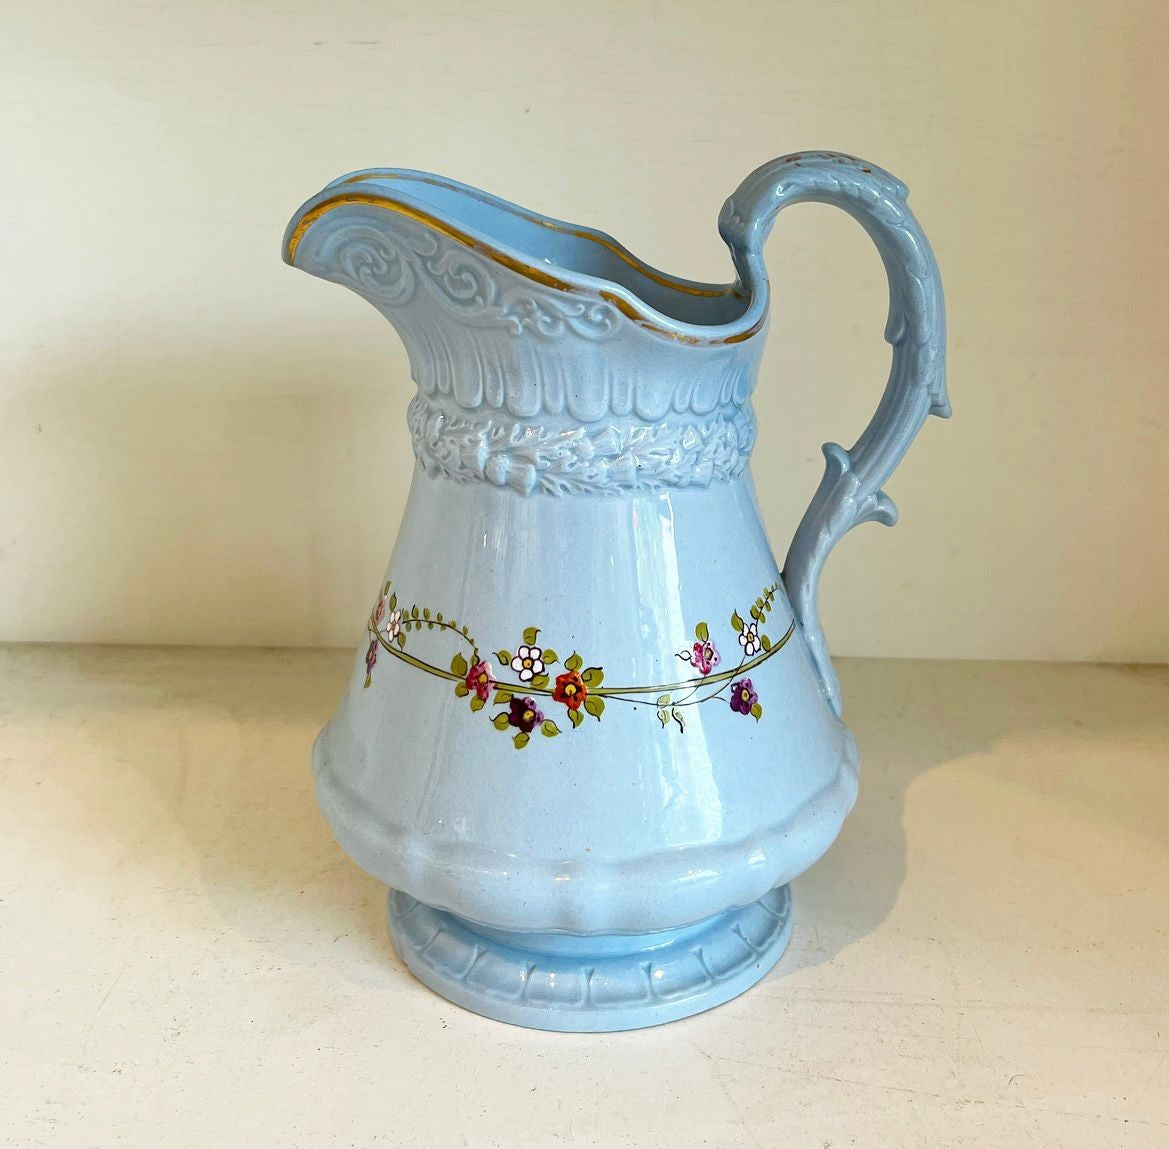 A Collection of Fifteen Pale Blue Stoneware PitcherJugs Handpainted with Flowers and Gilded Accents by William Ridgway circa 1840s